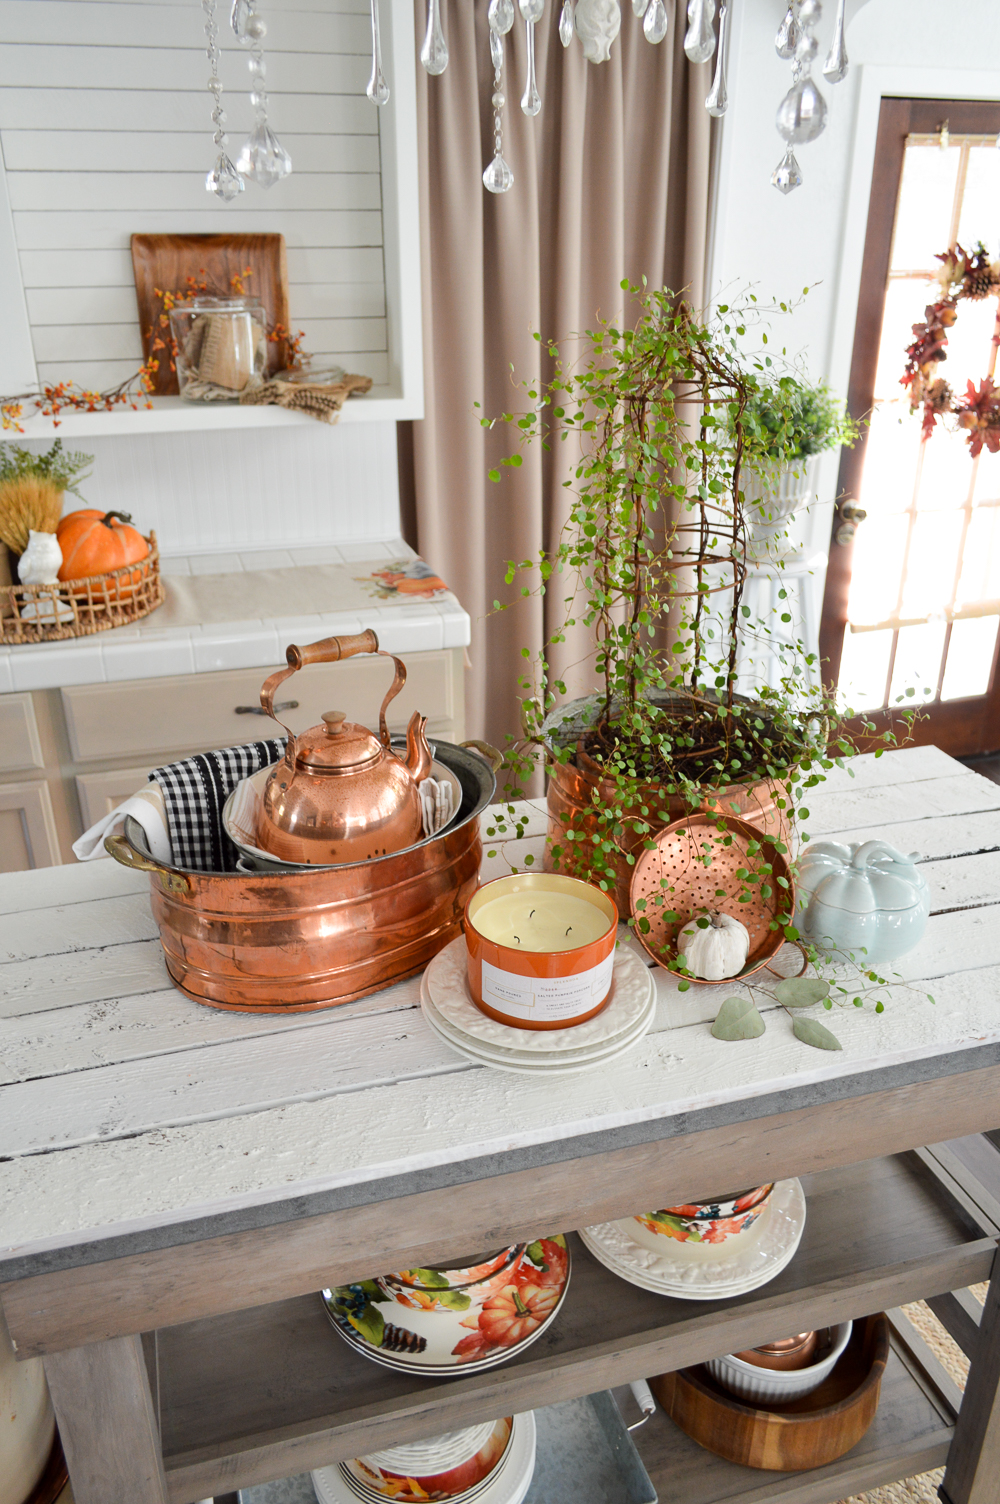 Easy Decorating Ideas Fall Kitchen Sun Room Apothecary www.foxhollowcottage.com 49